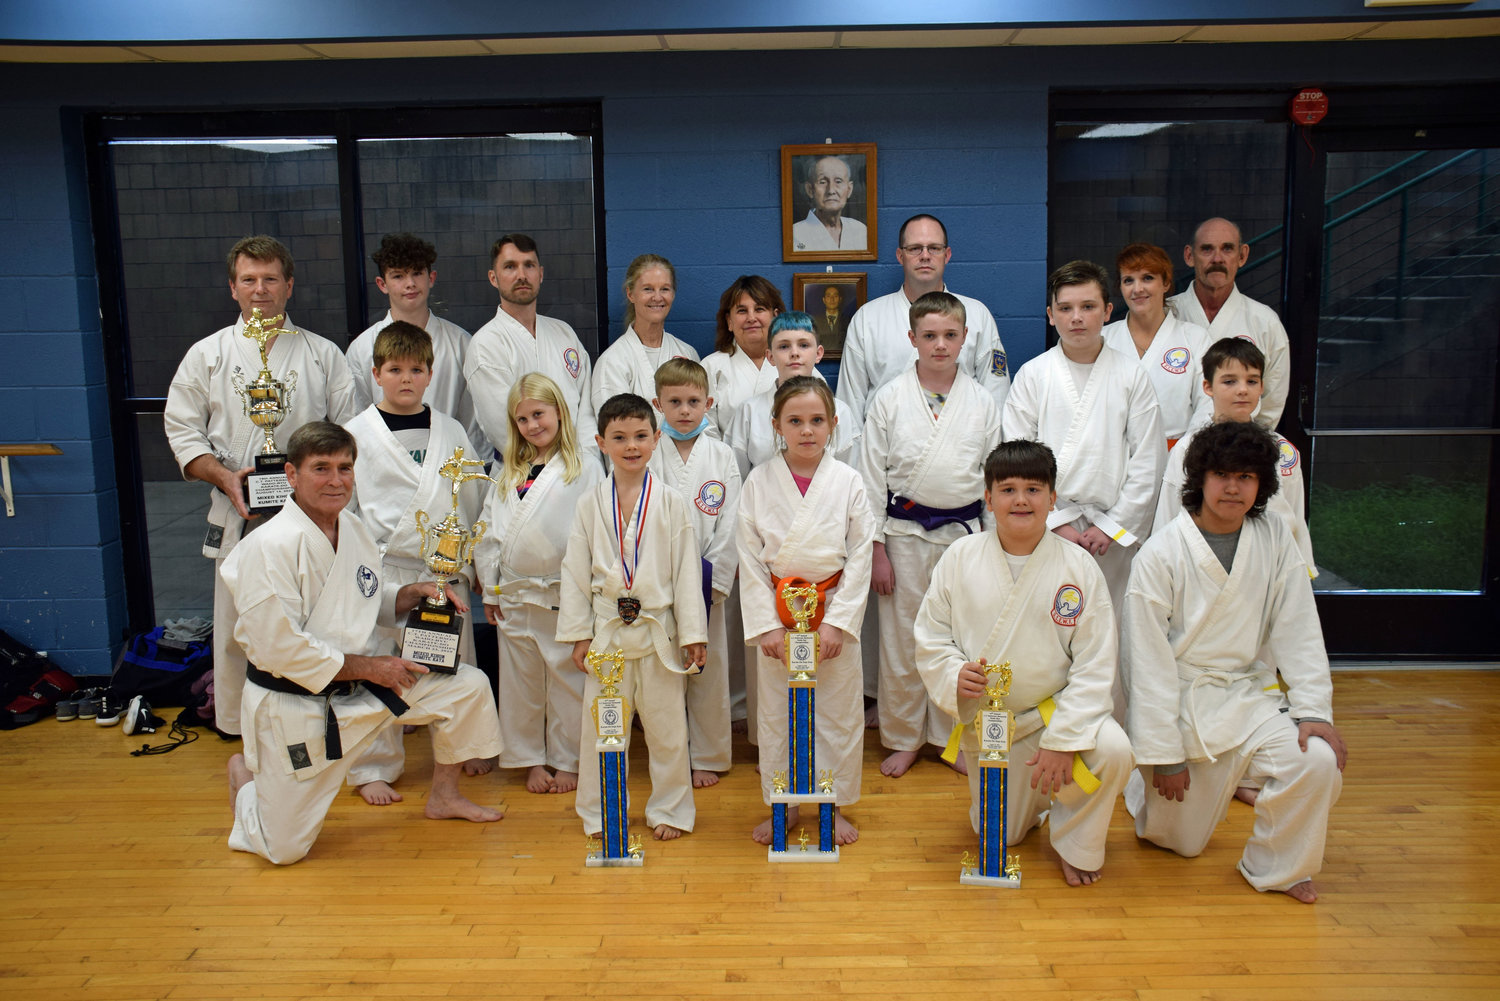 Lewisburg Karate Students bring home trophies from the 19th Annual C.T. Patterson Memorial Championship.